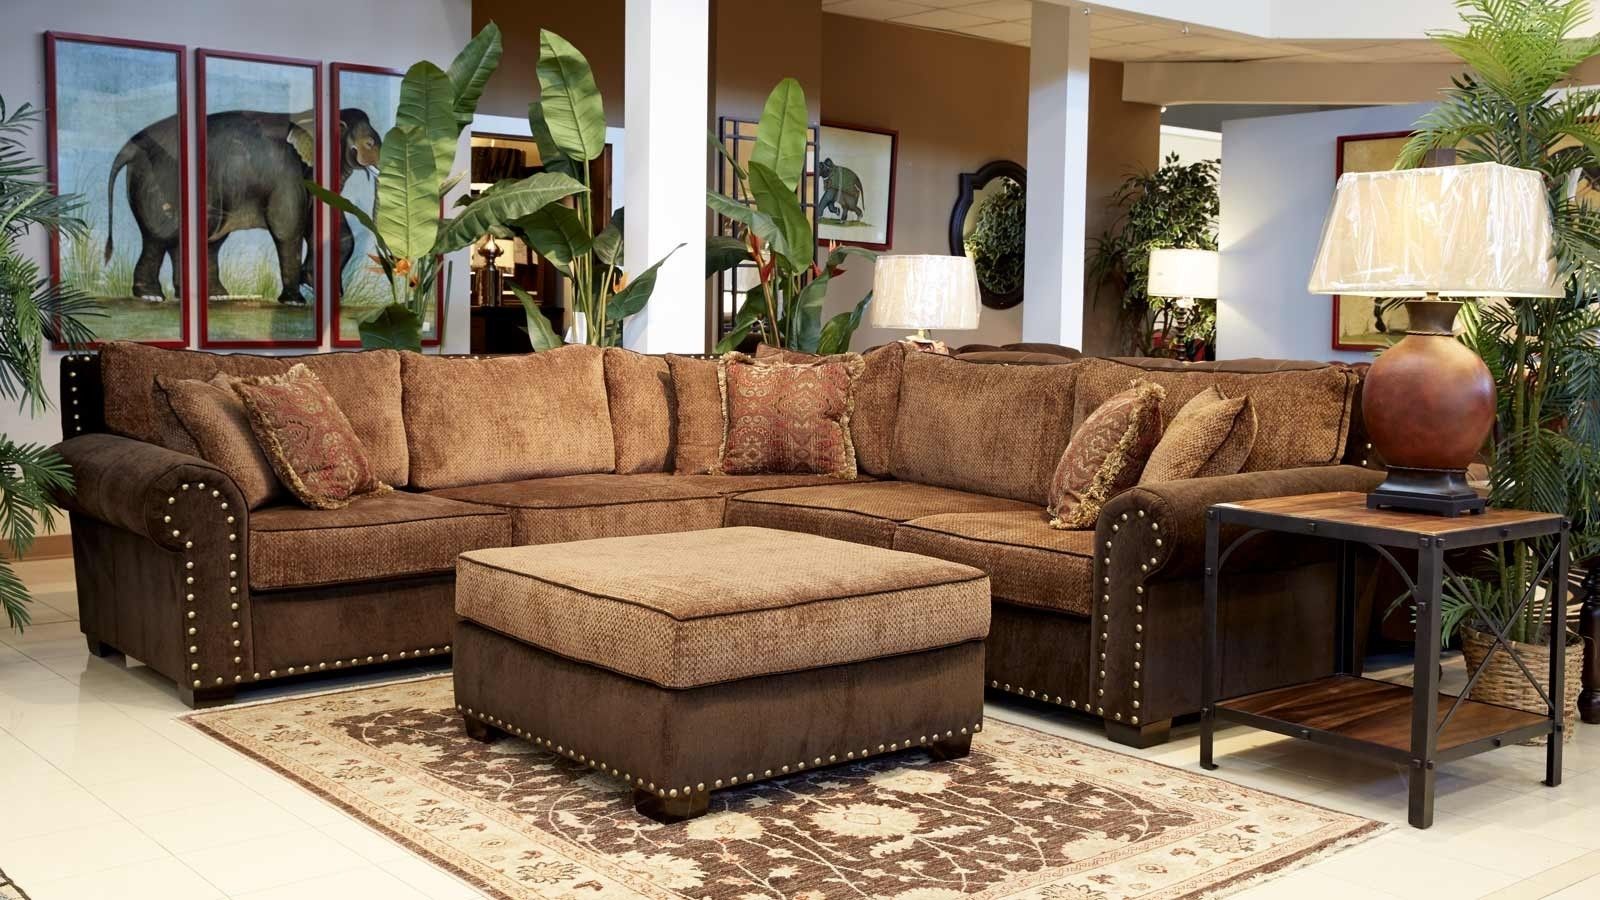 Barcelona Living Room Collection | Gallery Furniture With Gallery Furniture Sectional Sofas (Photo 5 of 10)